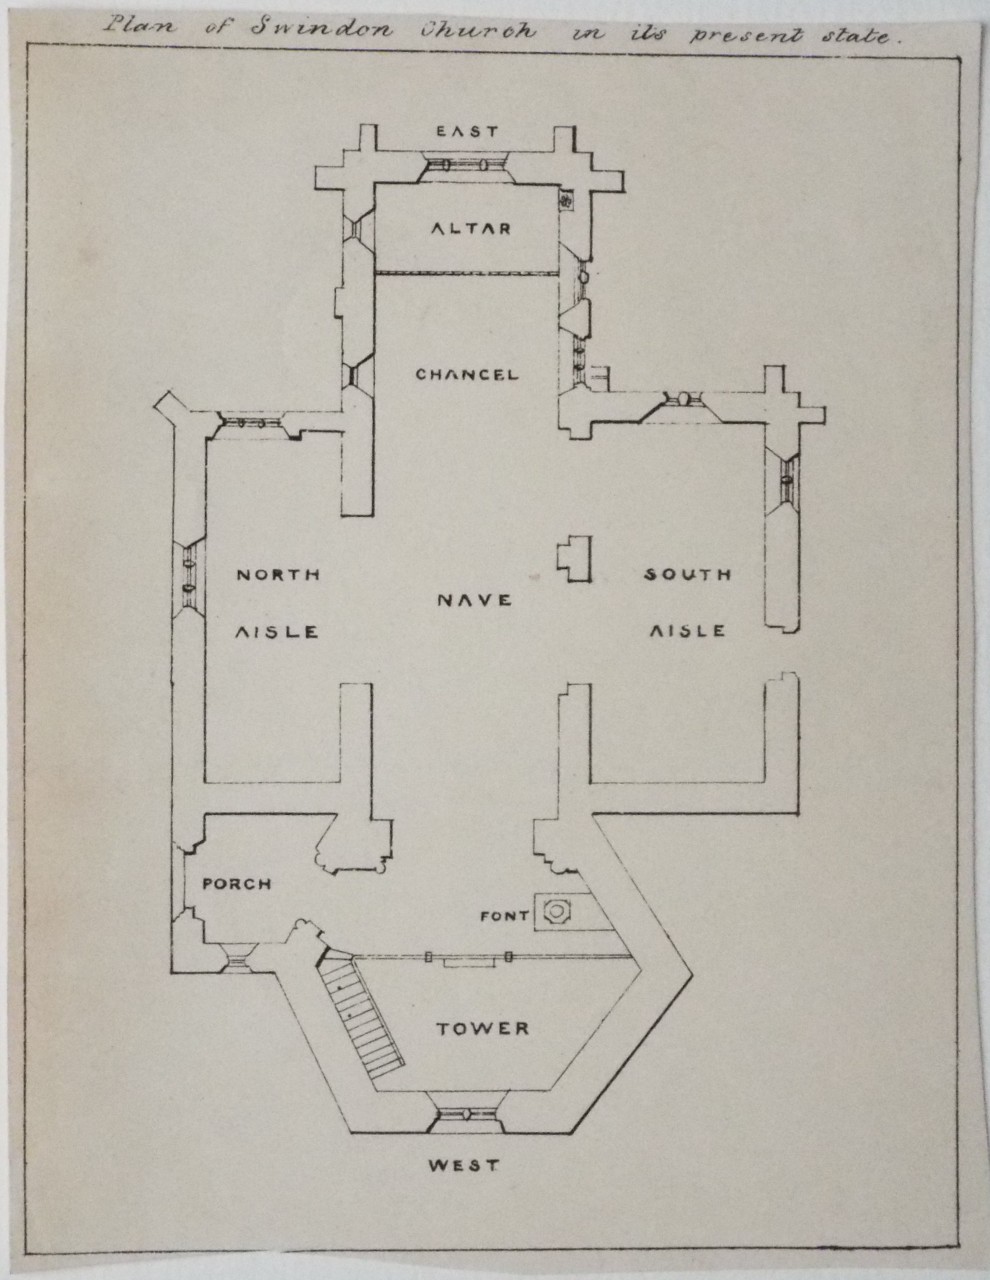 Lithograph - Plan of Swindon Church in its present state.